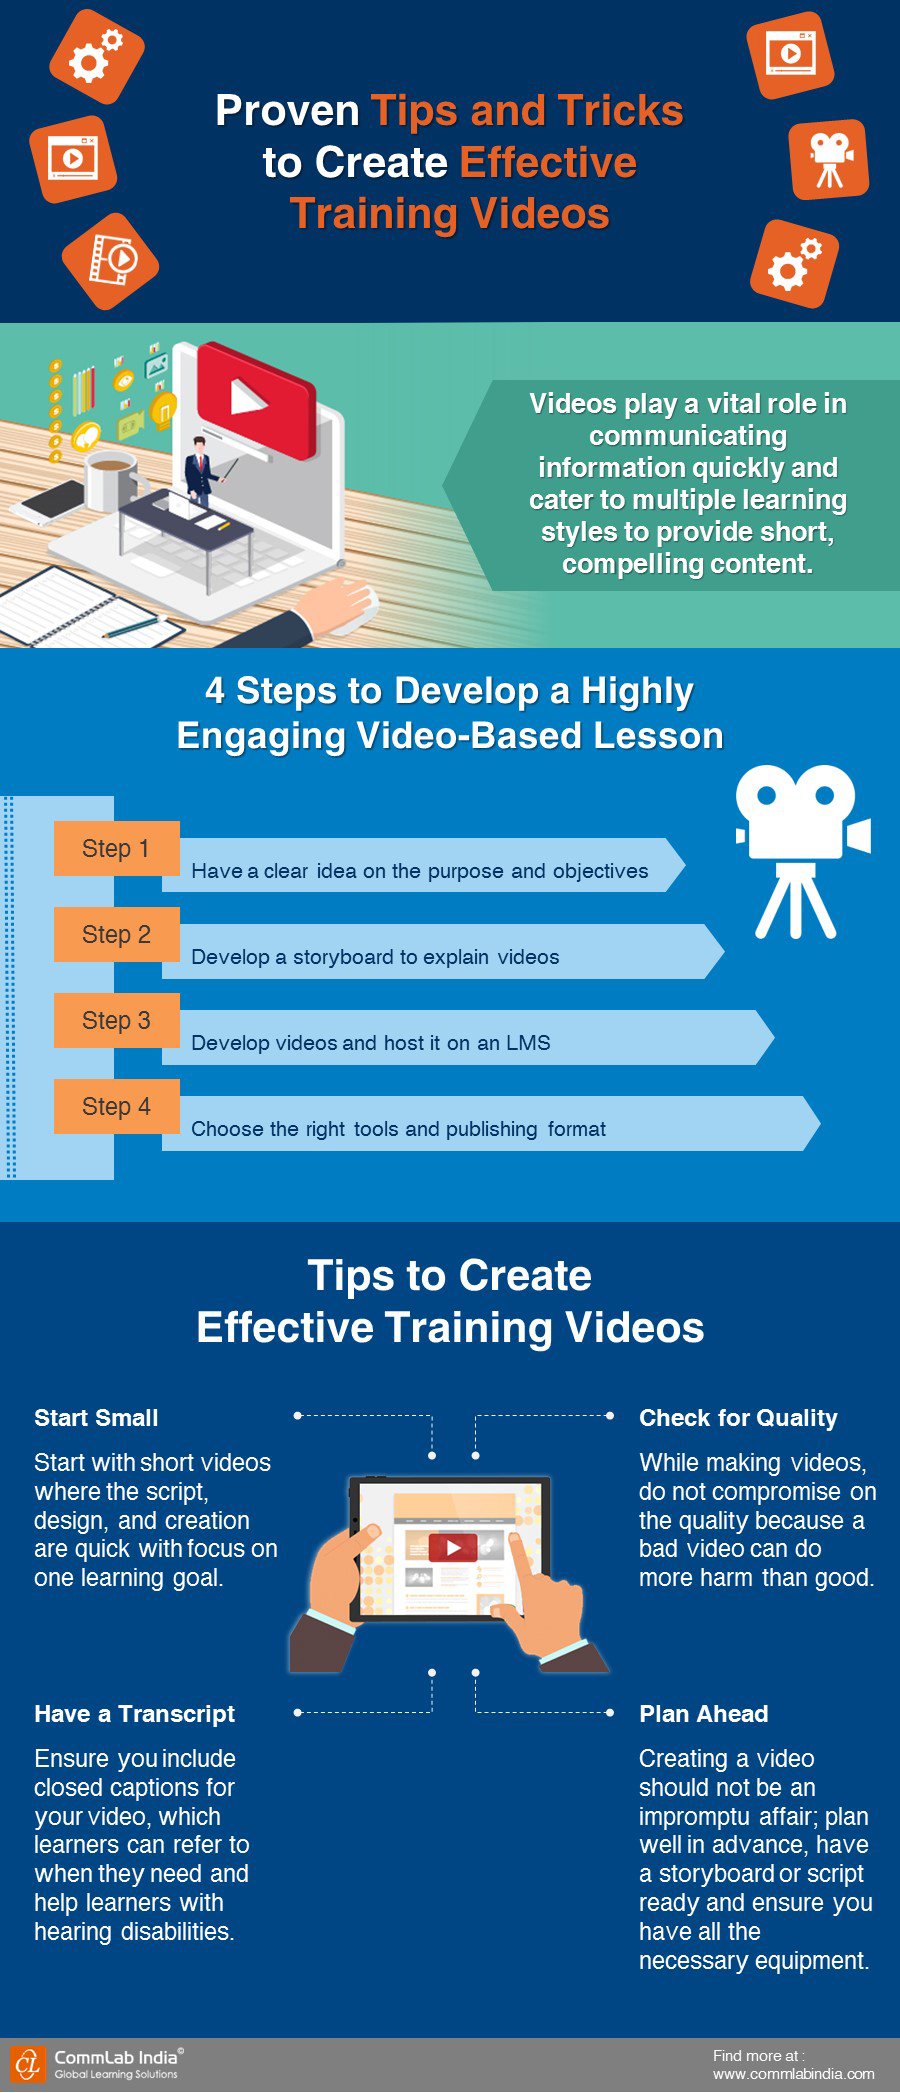 Proven Tips and Tricks to Create Effective Training Videos